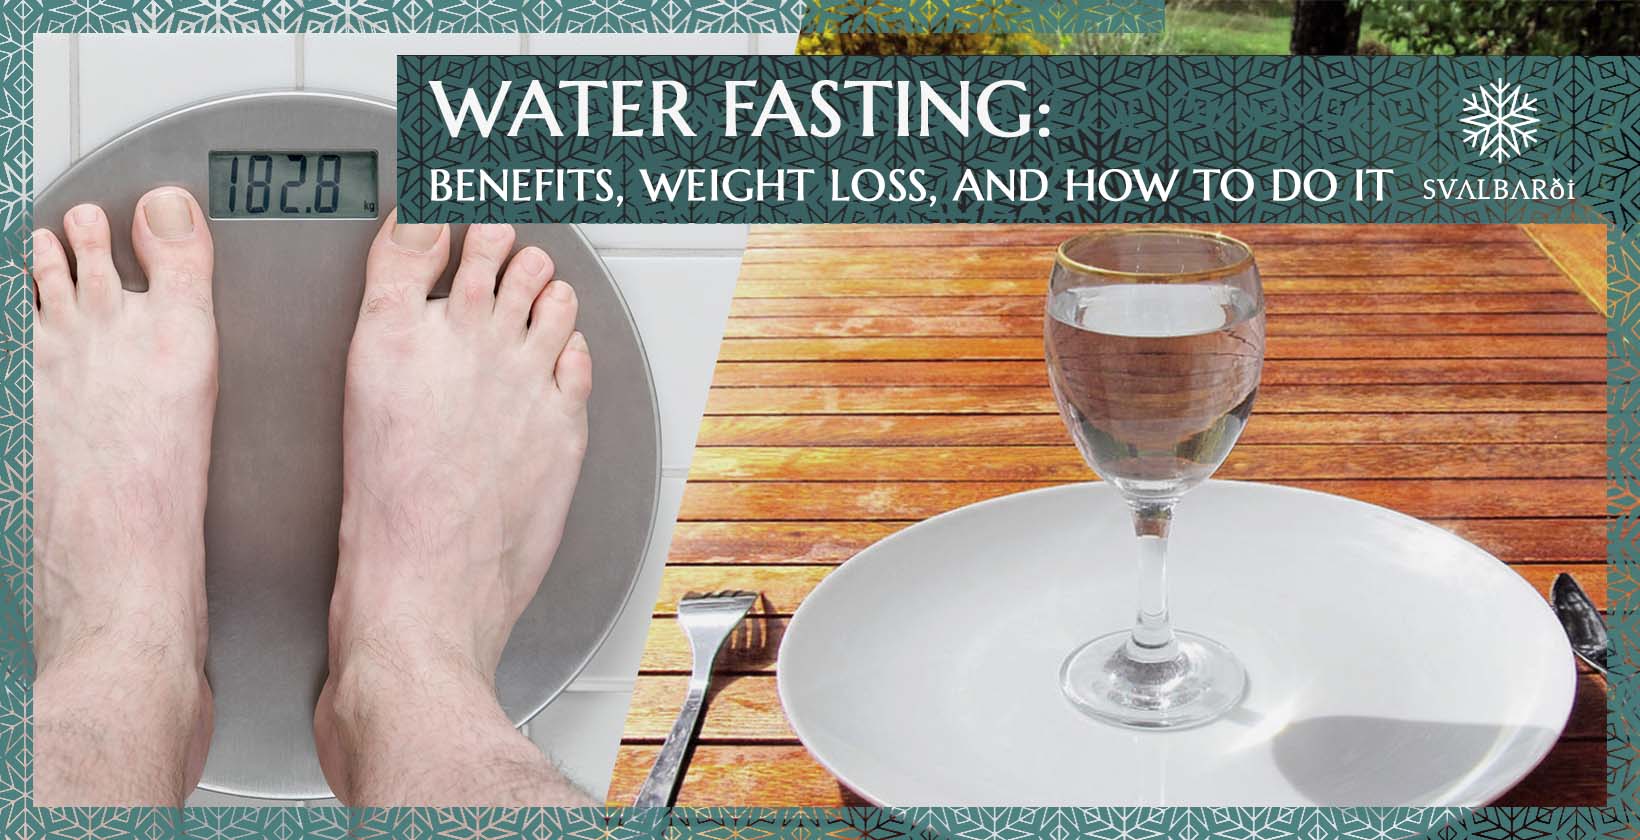 Water Fasting Definition and Benefits